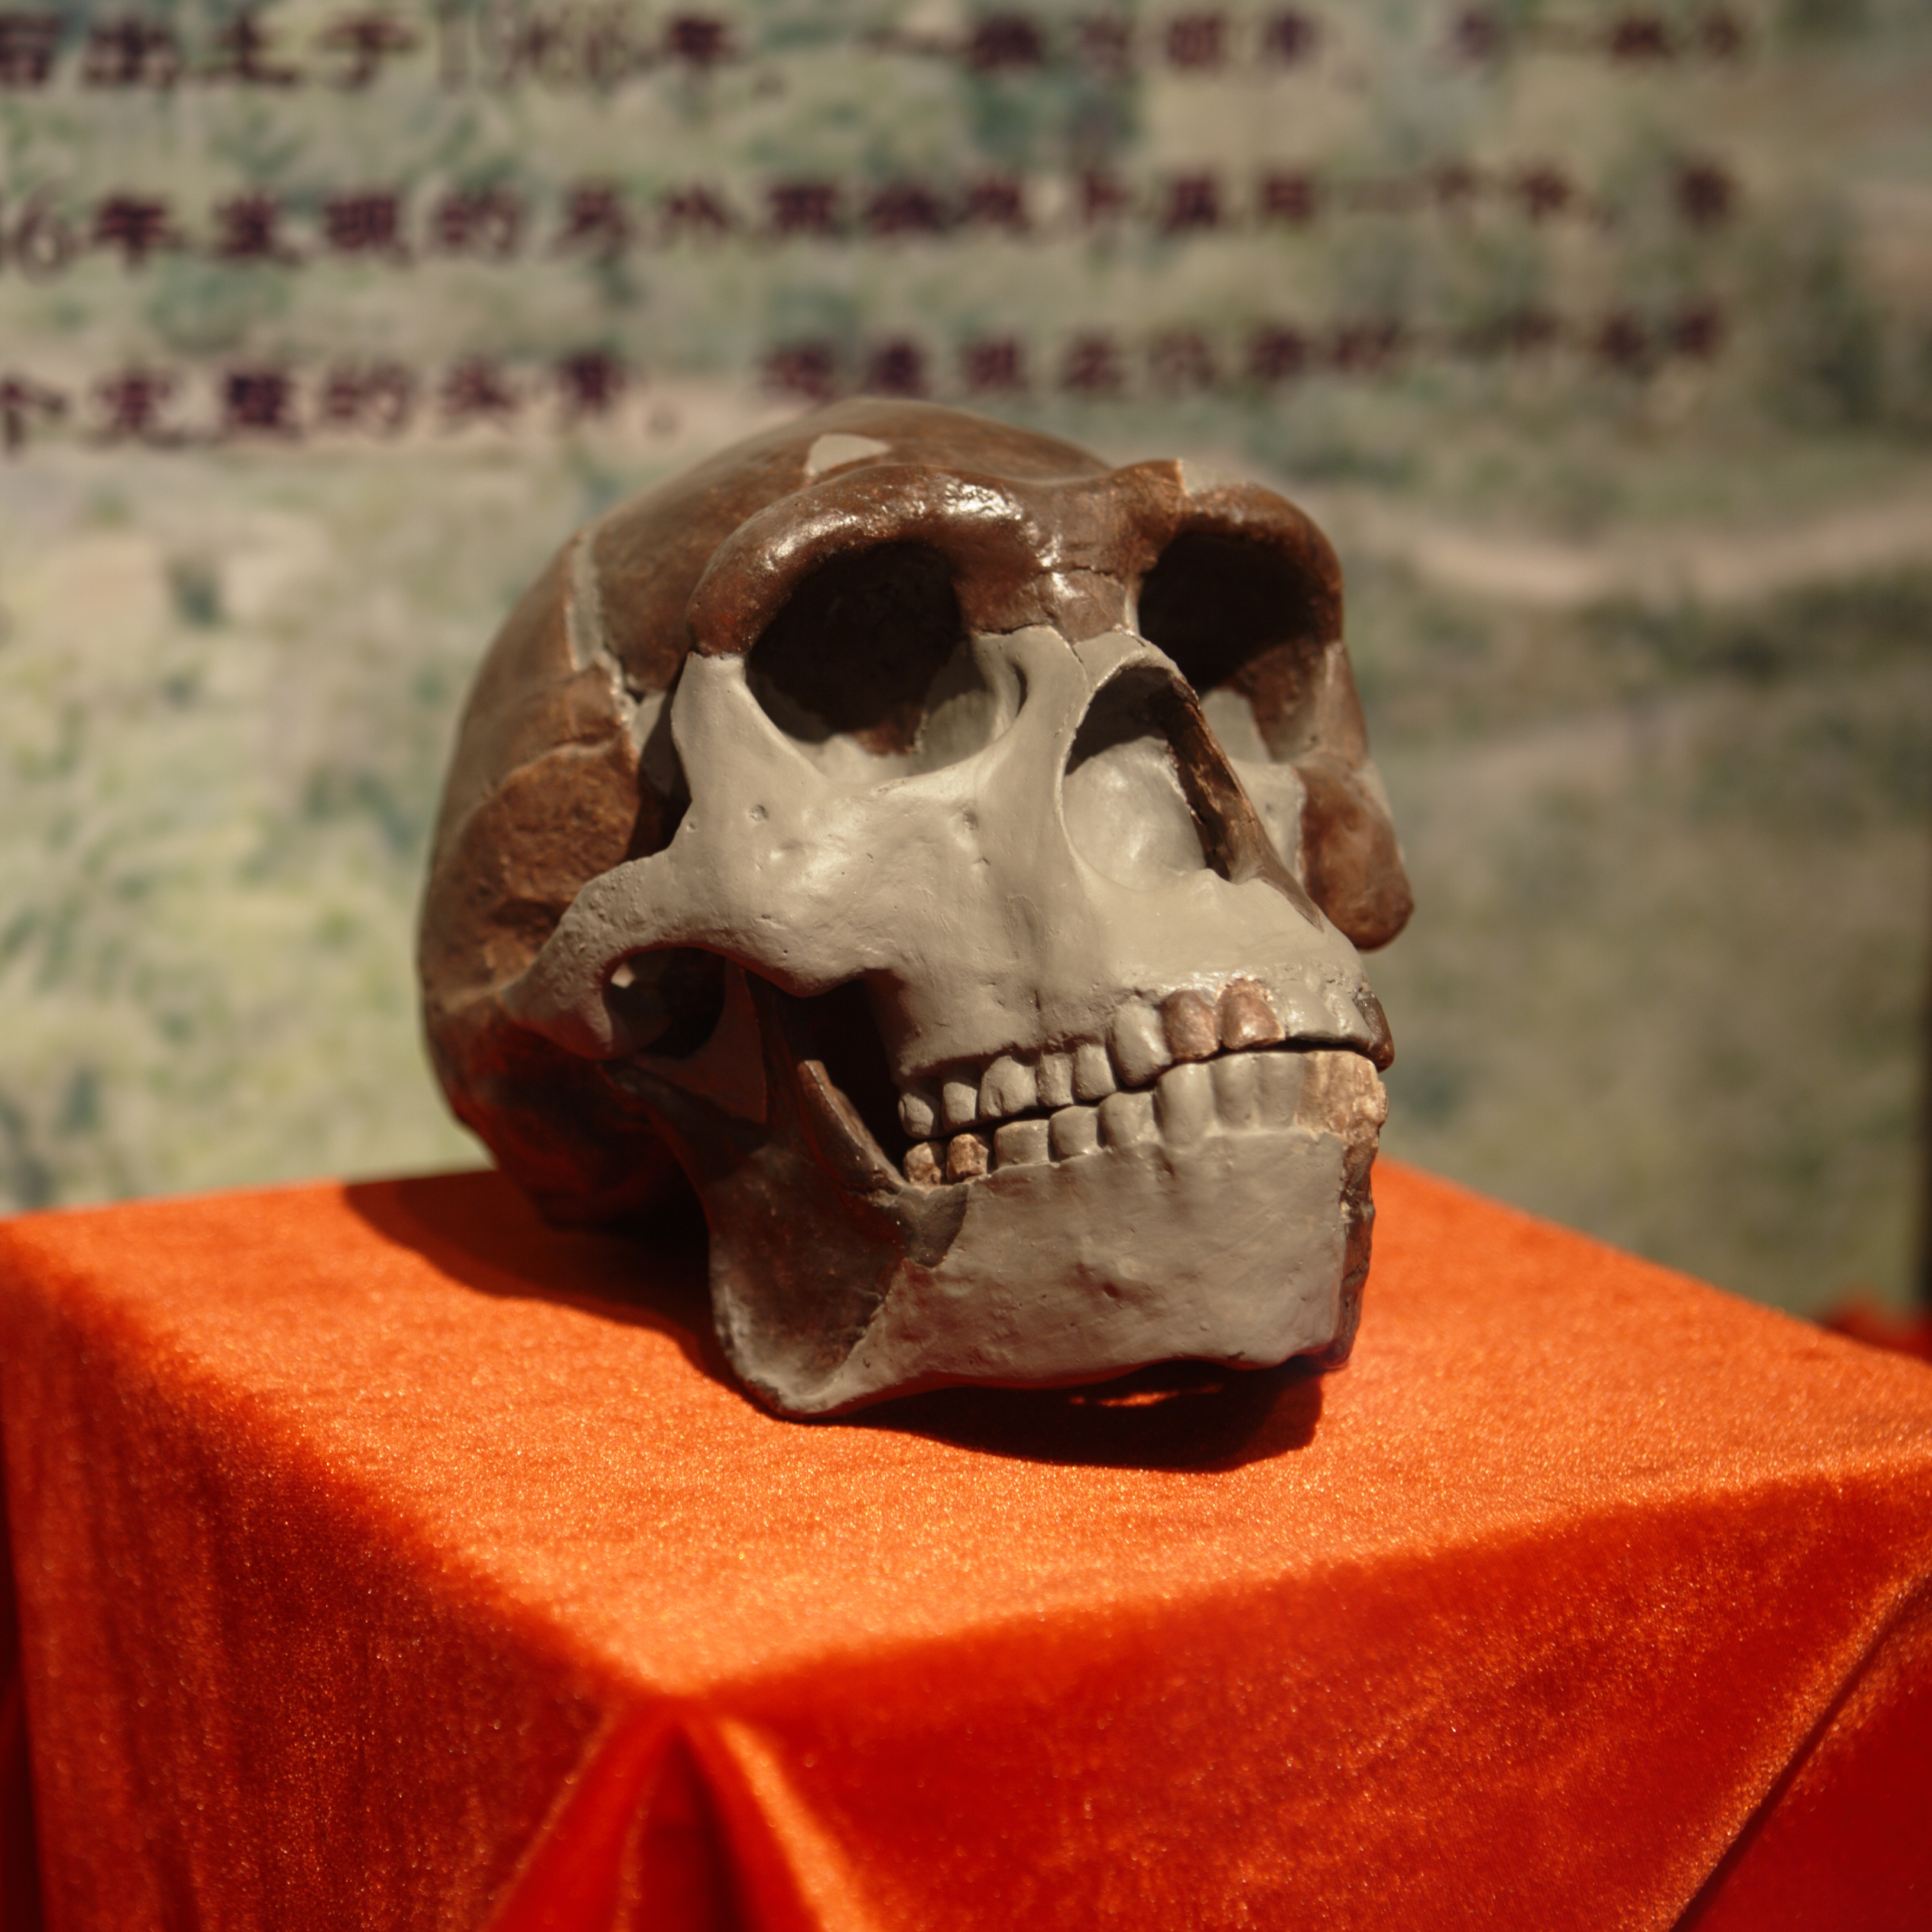 A replica of a Peking Man skull on a pedestal. The brow ridge is quite bold and the profile is elongated.